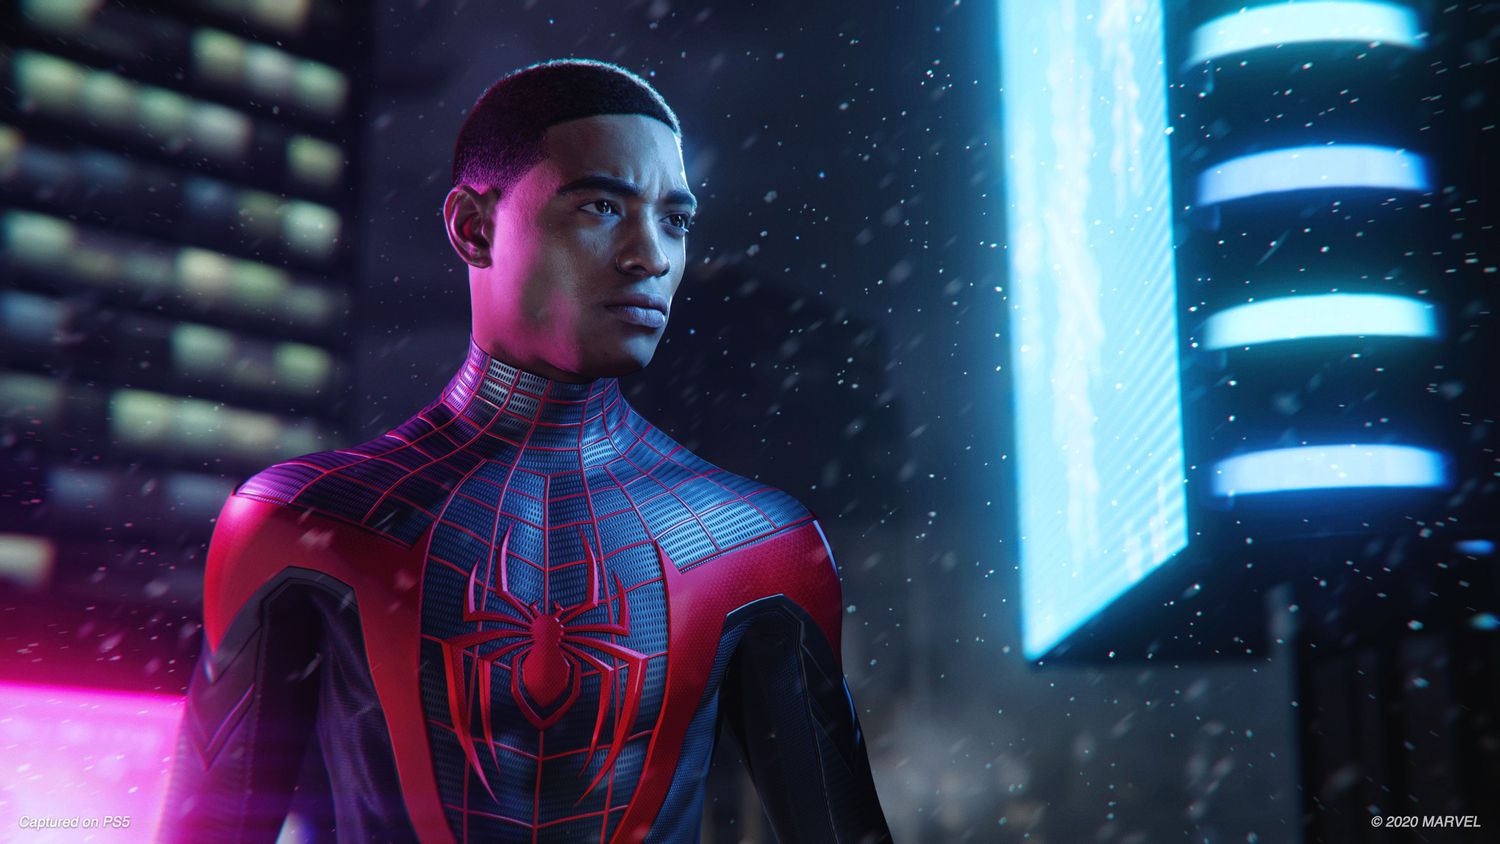 how tall is miles morales